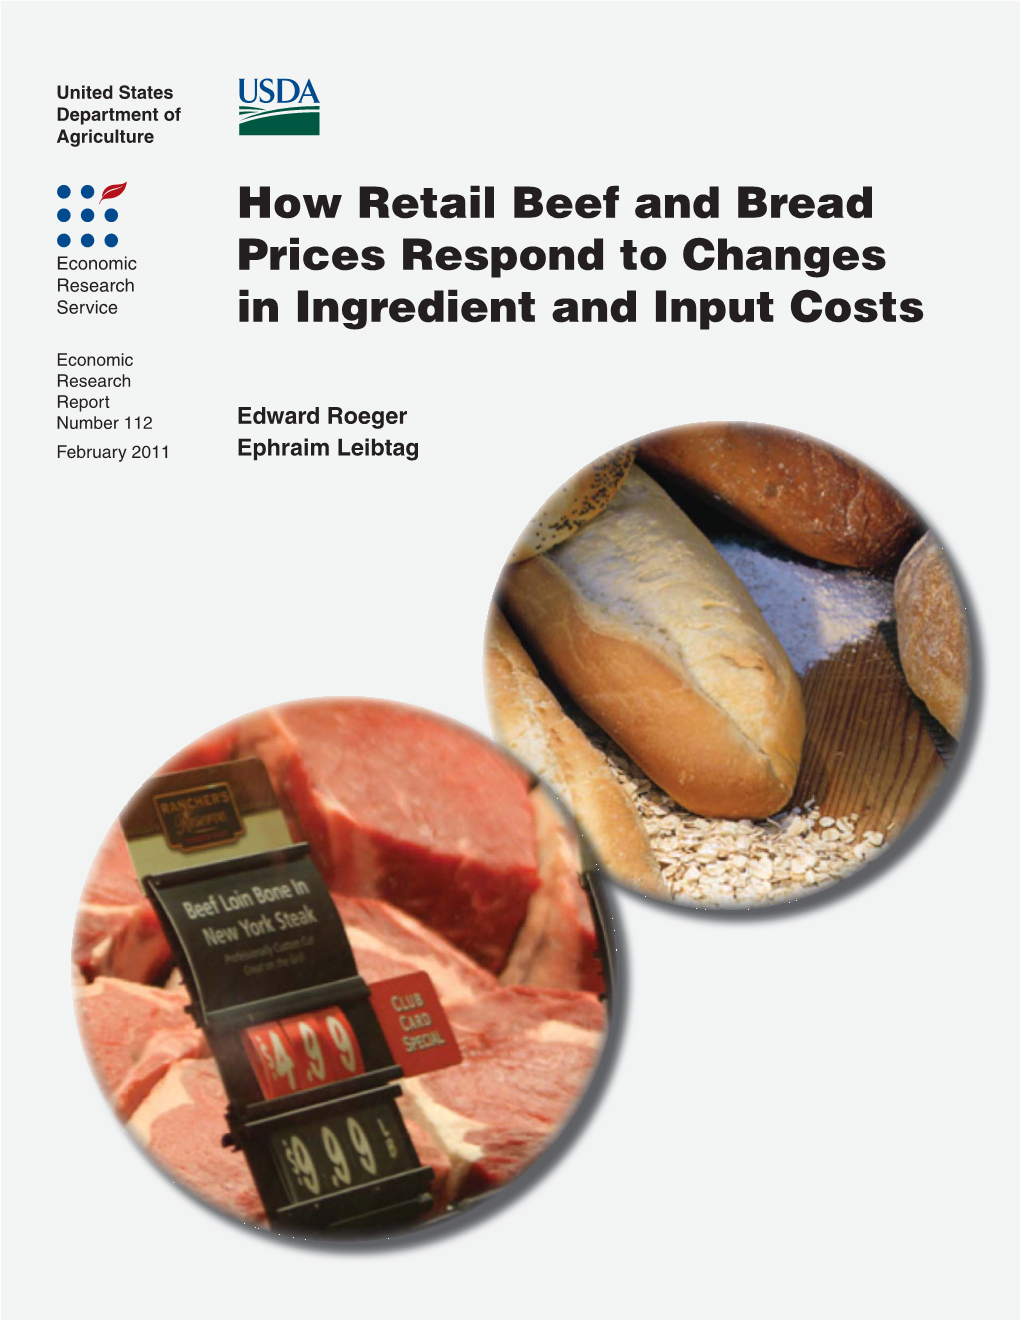 How Retail Beef and Bread Prices Respond to Changes in Ingredient and Input Costs, ERR-112, U.S